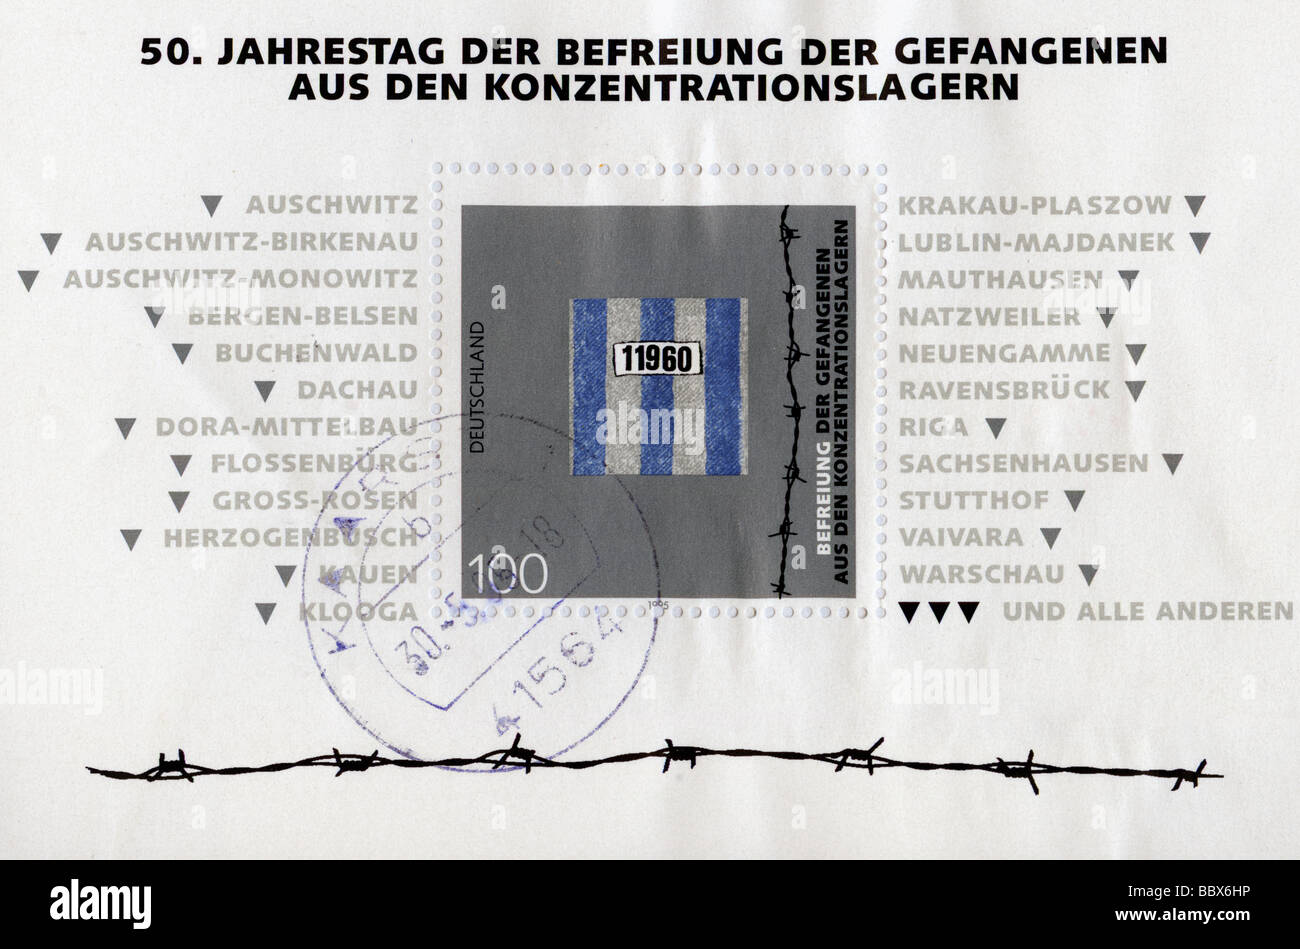 mail / post, postage stamps, Germany, Federal Republic, 100 Pfennig stamp, commemorative stamp, 50th anniverary of liberation of captives from the concentration camps, stamped 30.5.1985, Stock Photo